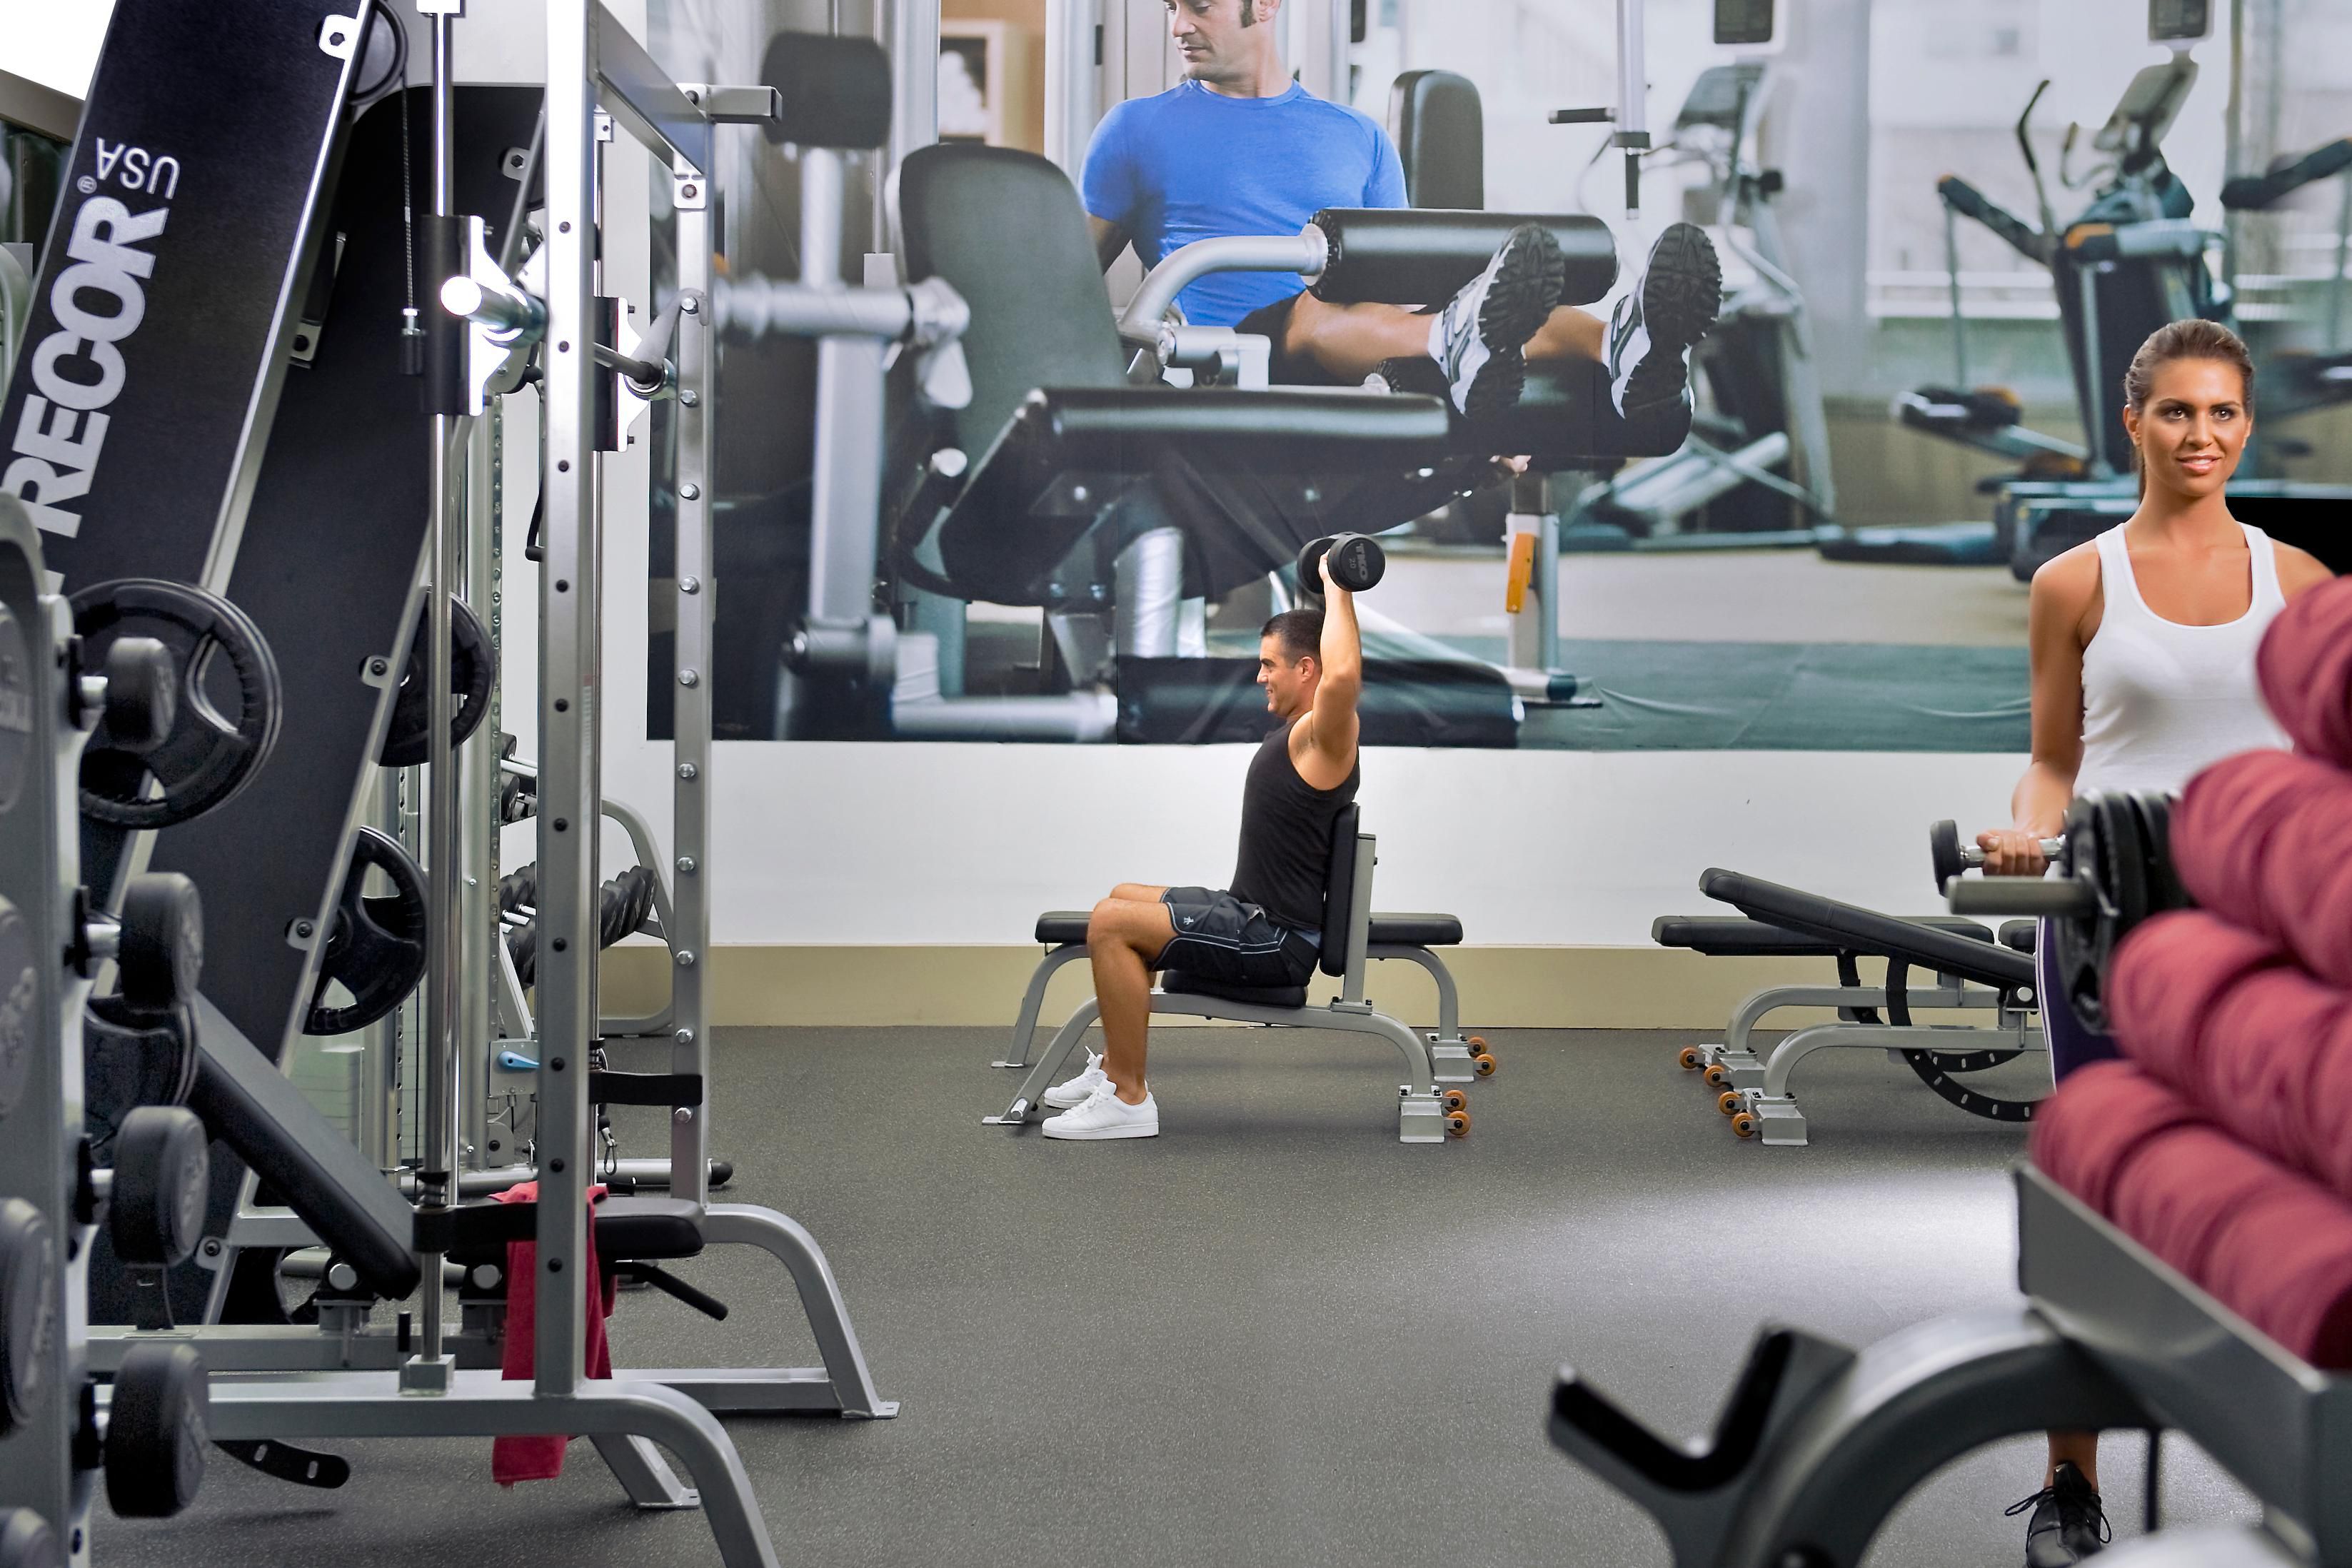 Work up a sweat in our 24/7 gym featuring state-of-the-art cardio